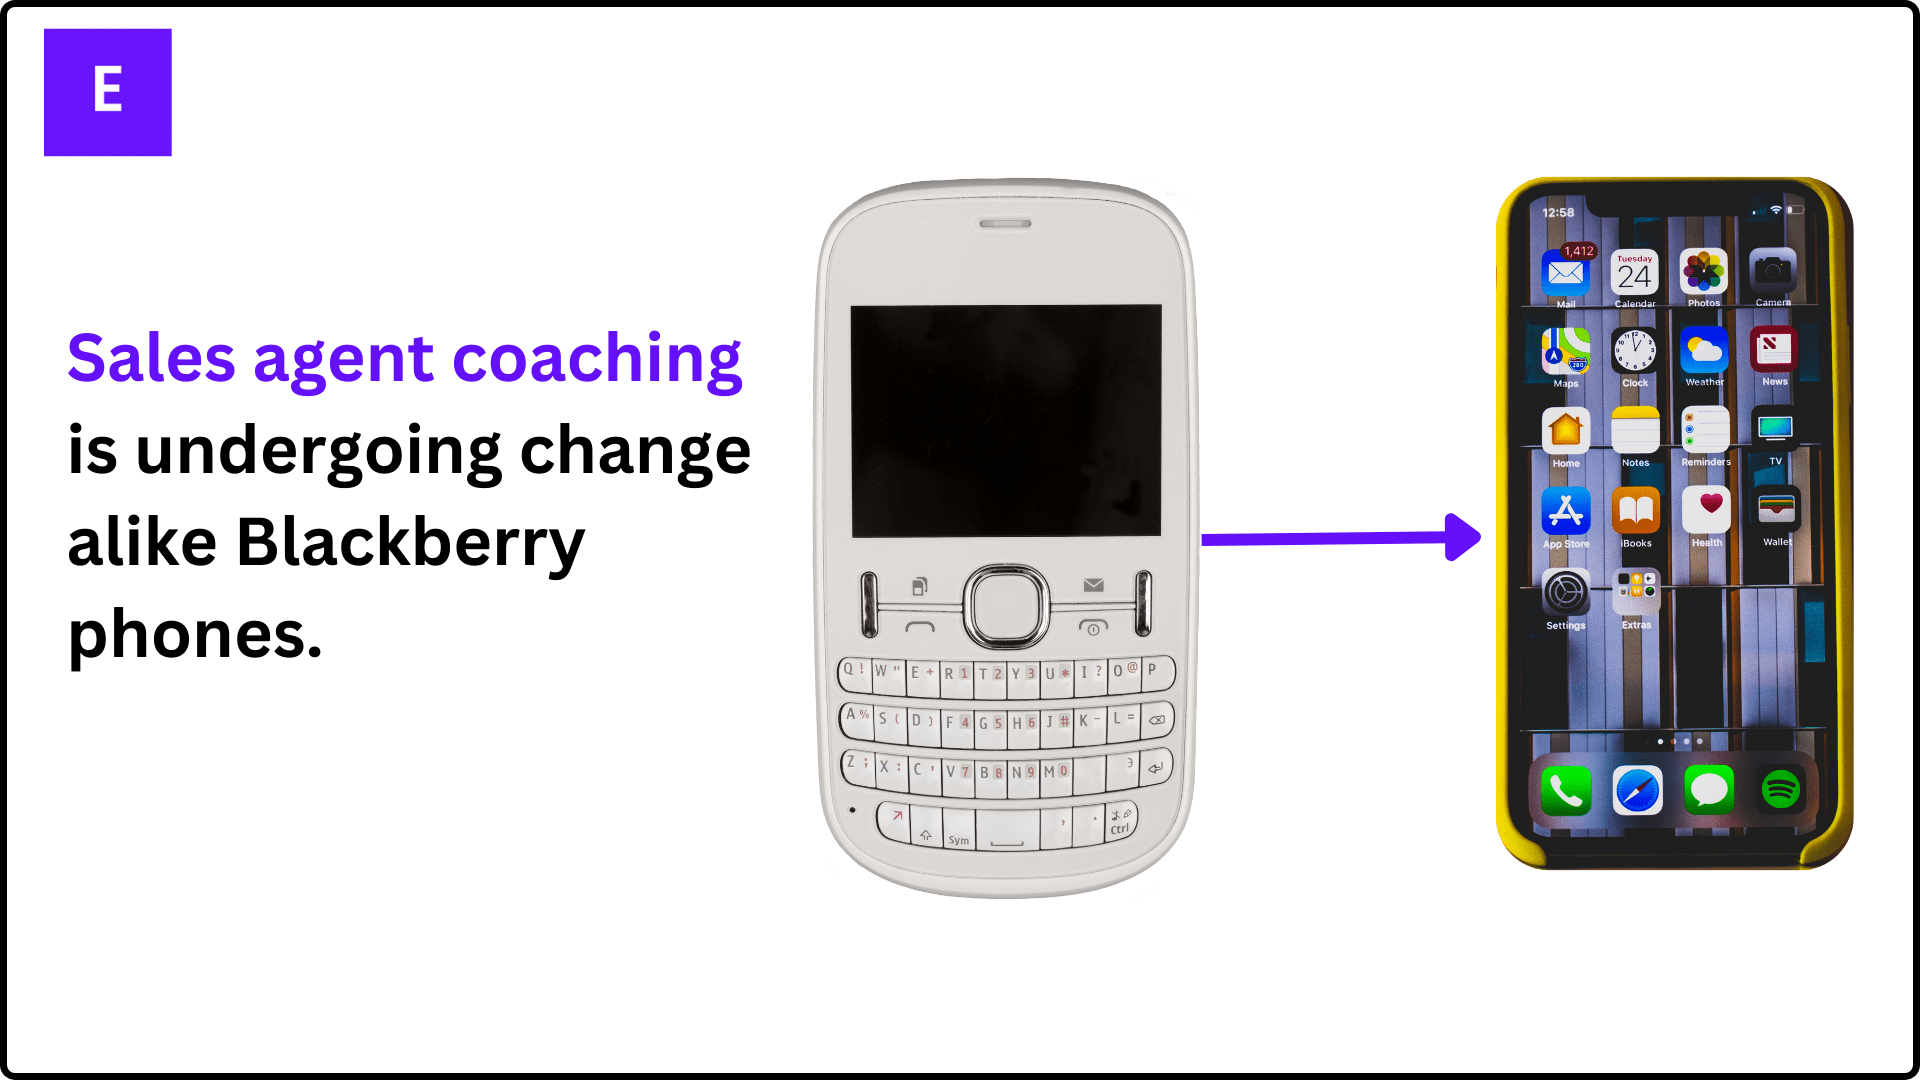 Moving from blackberry phone to smartphones